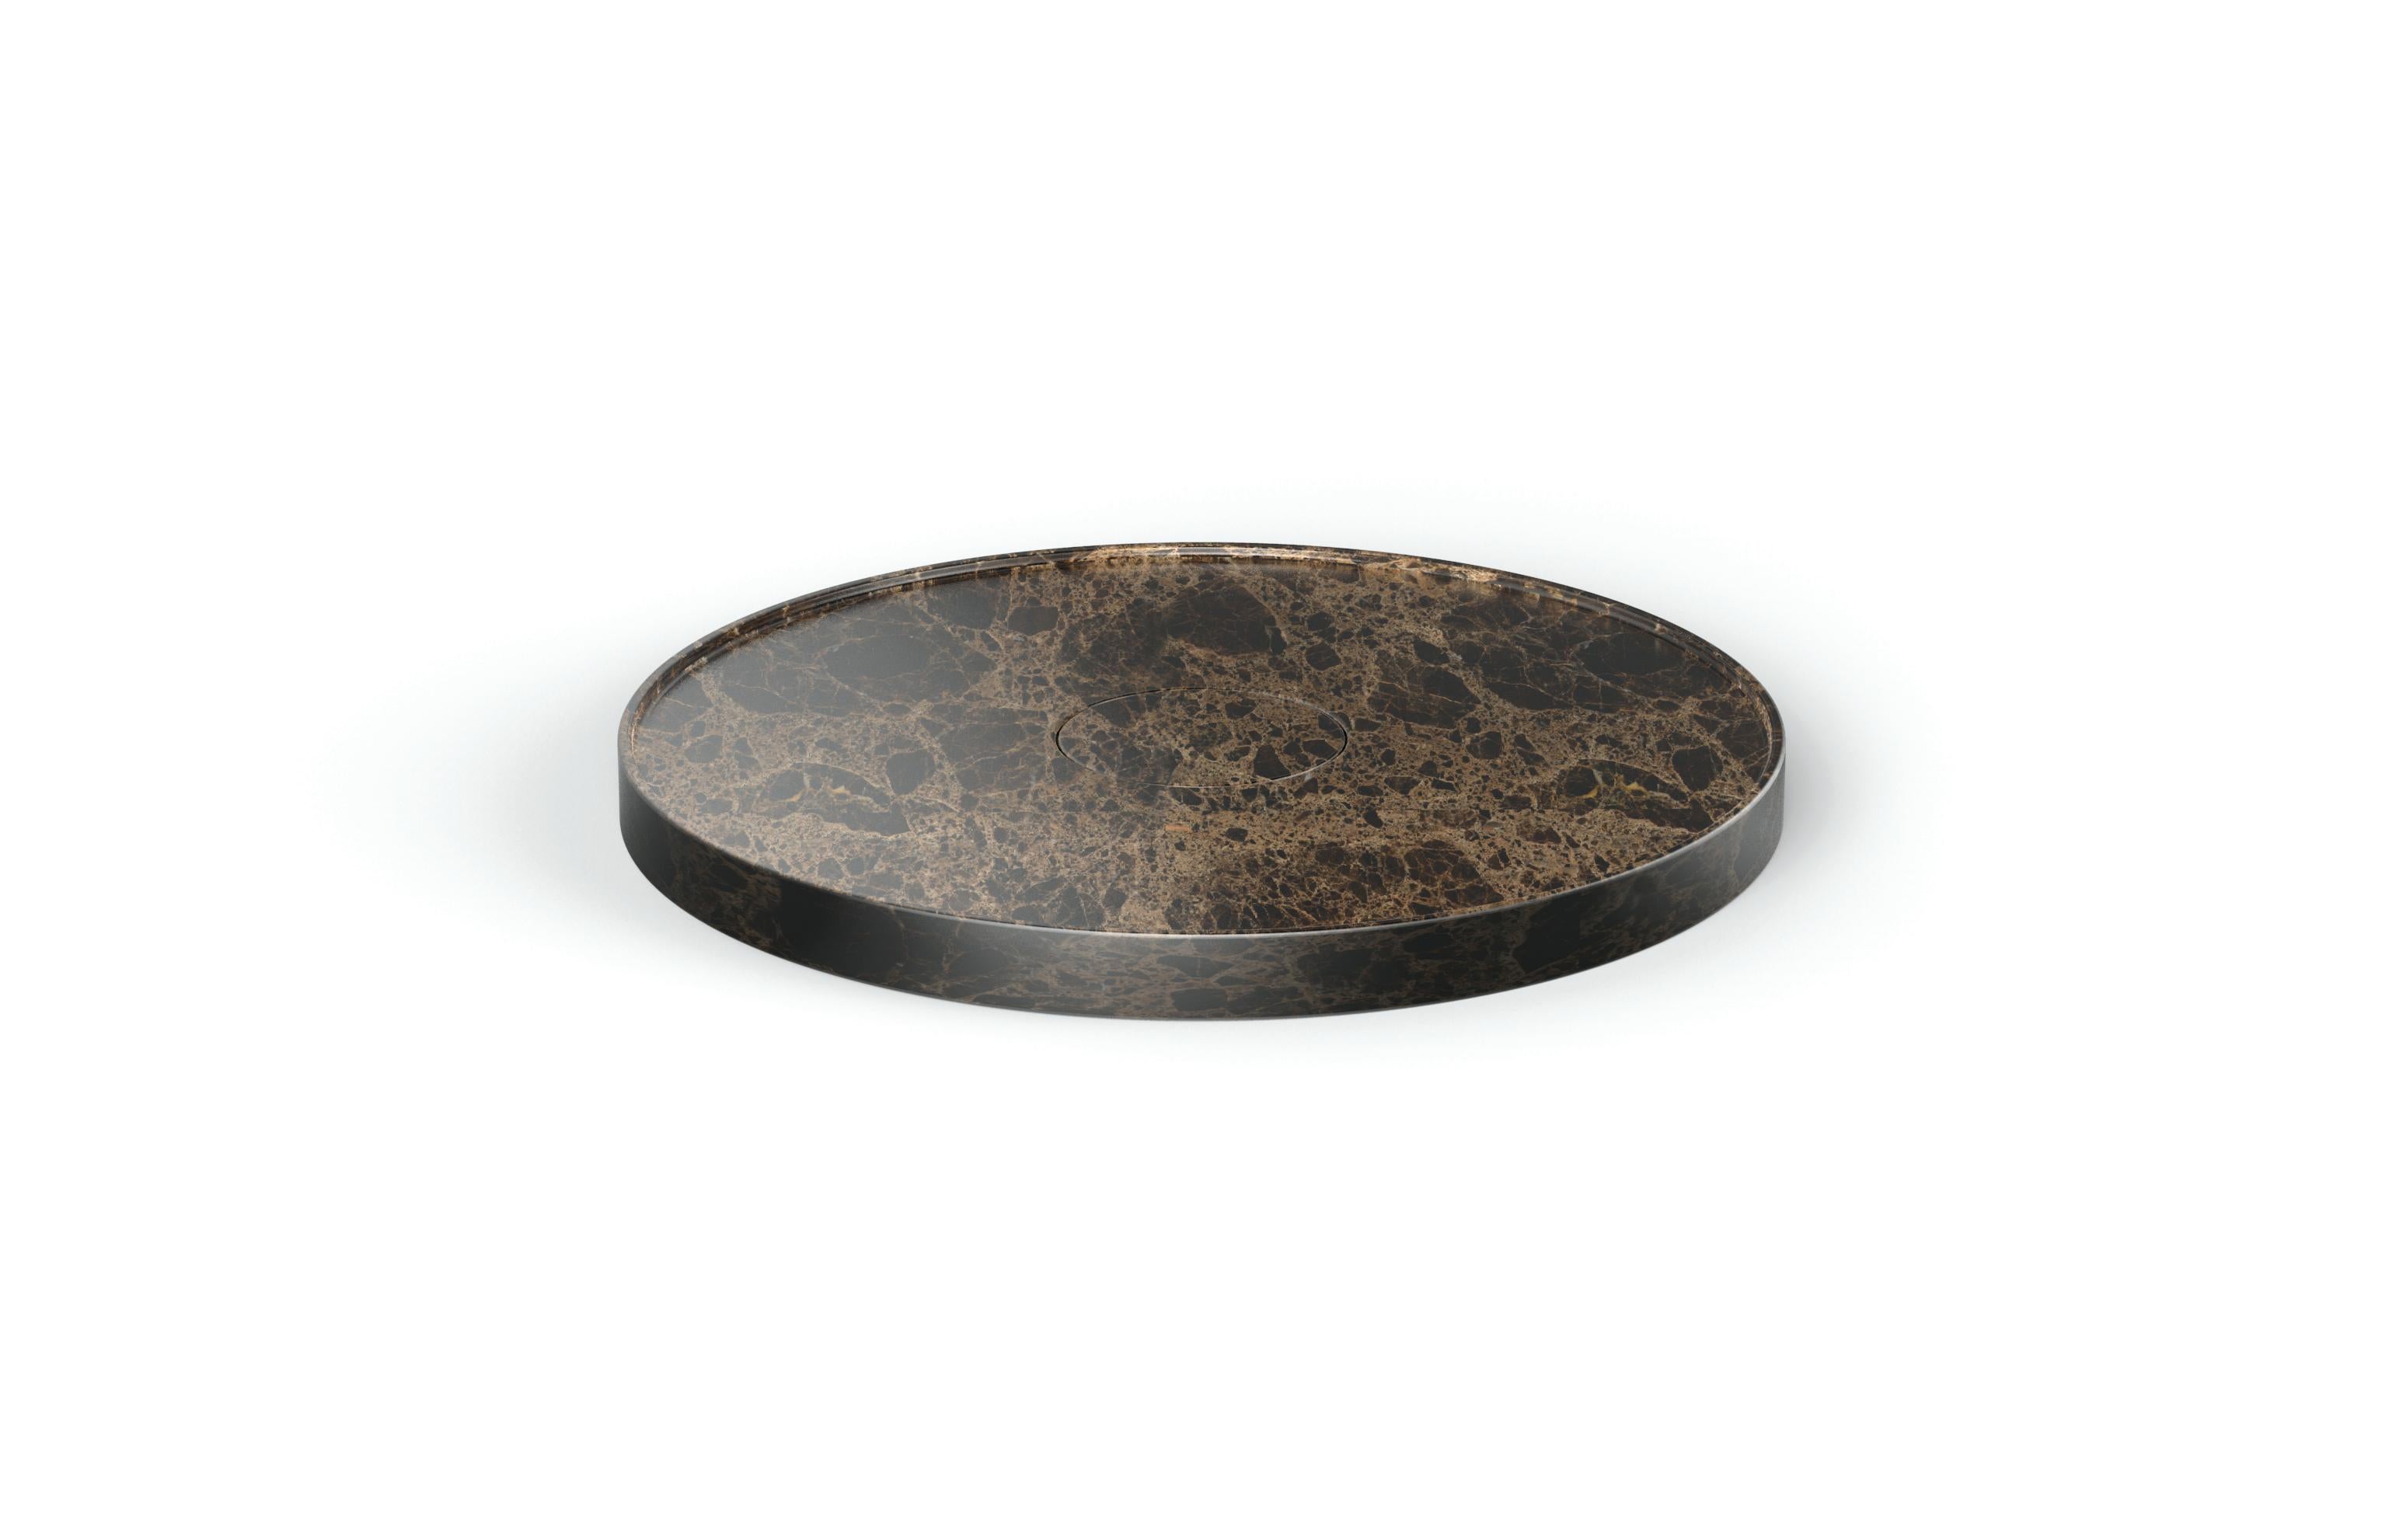 Entity circle shower I by Marmi Serafini
Materials: Emperador Brown marble.
Dimensions: D 80 x H 6 cm
Available in other marbles.

Designed for a free positioning in the room, or to create showers outdoor, has a raised border and restraining